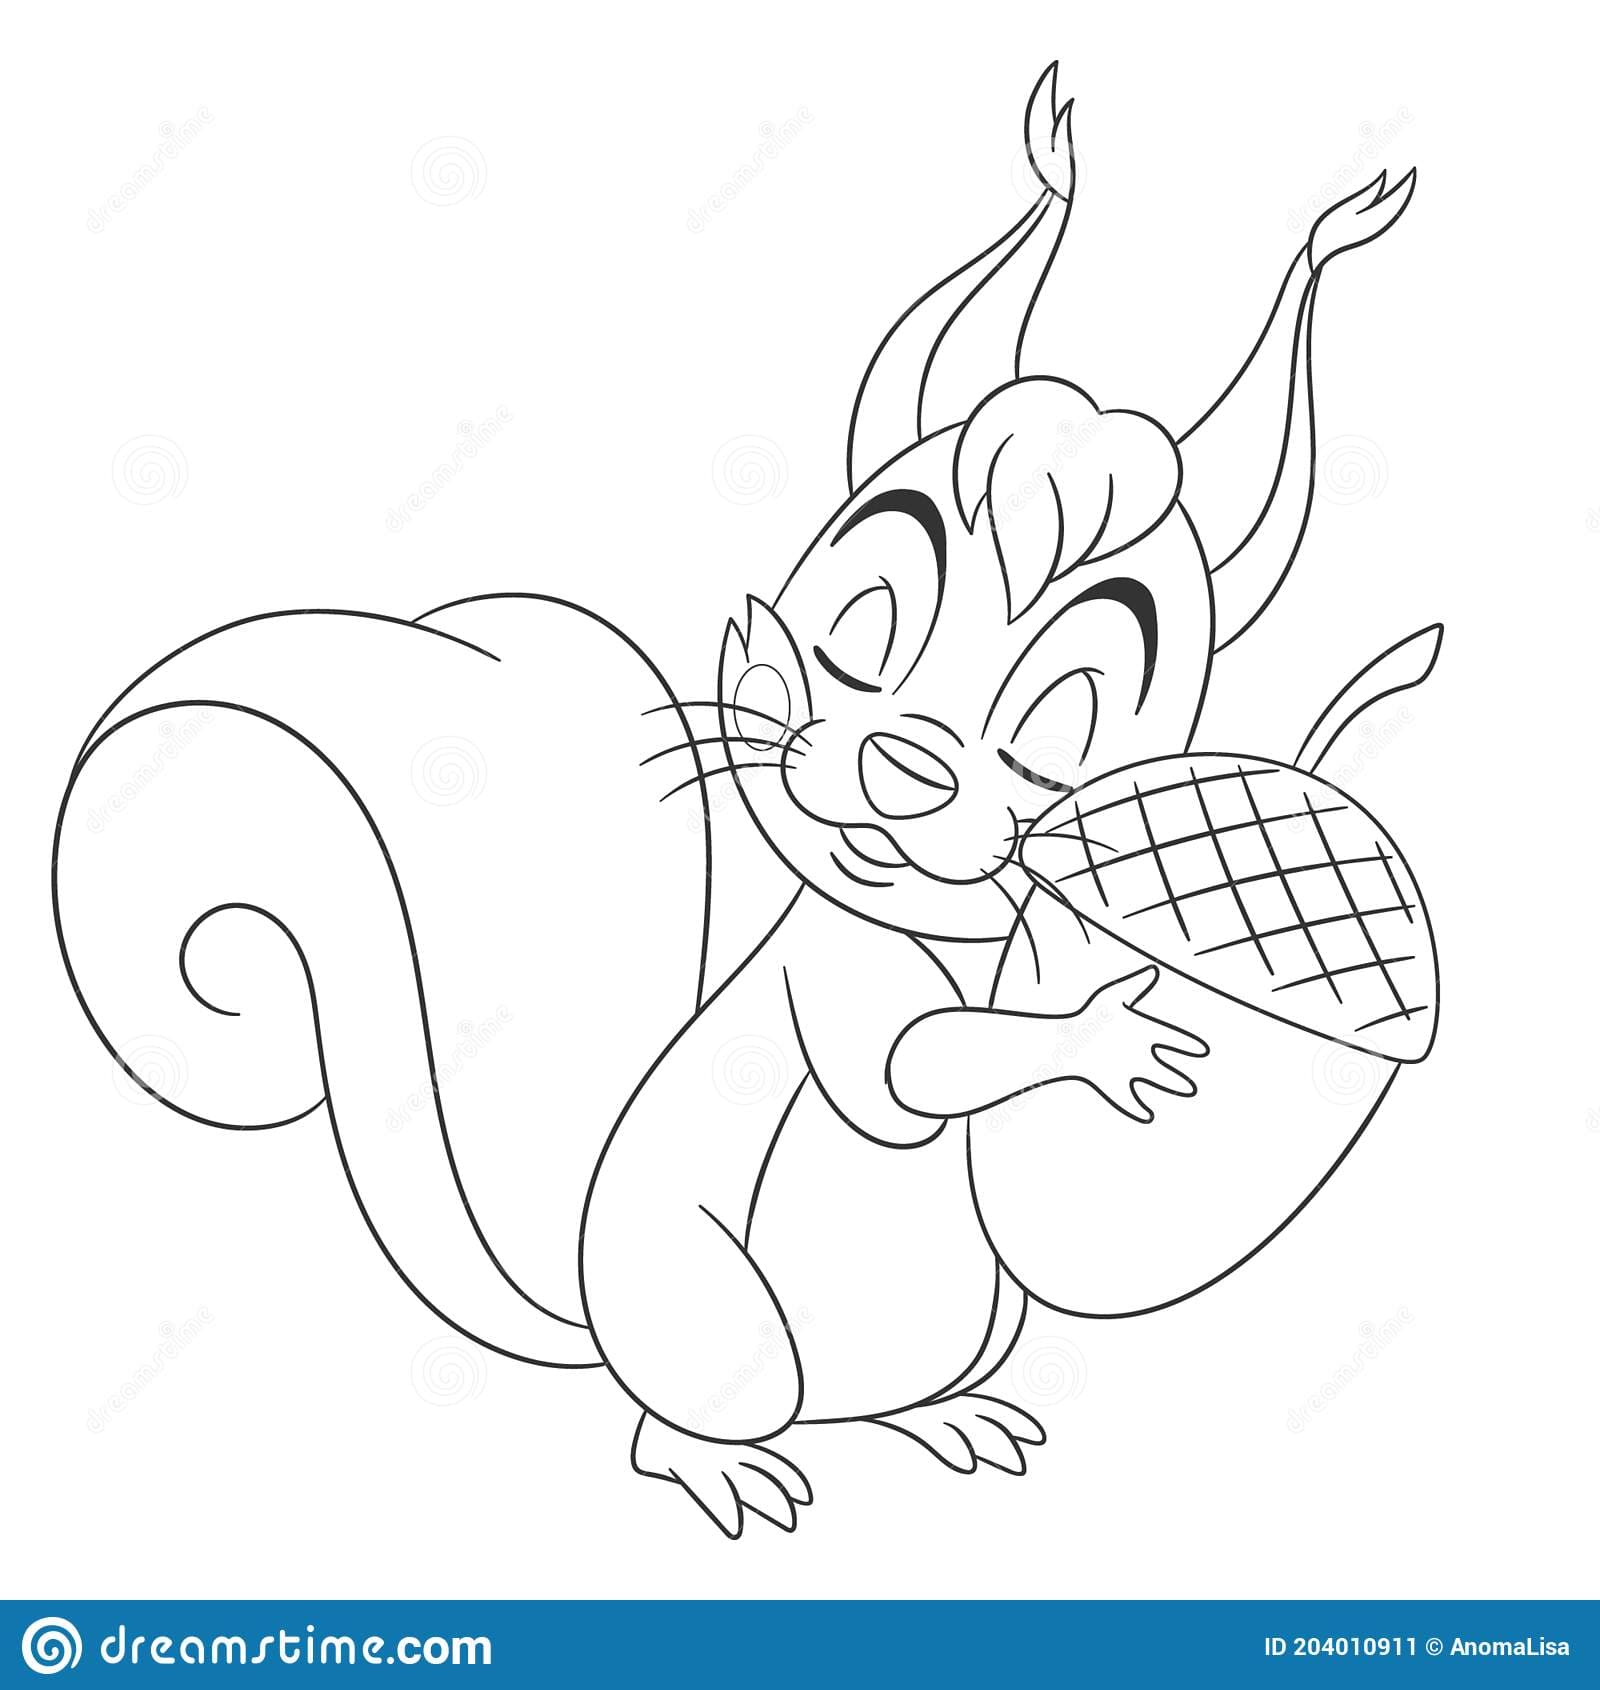 Coloring Page With Squirrel And Acorn Coloring Page